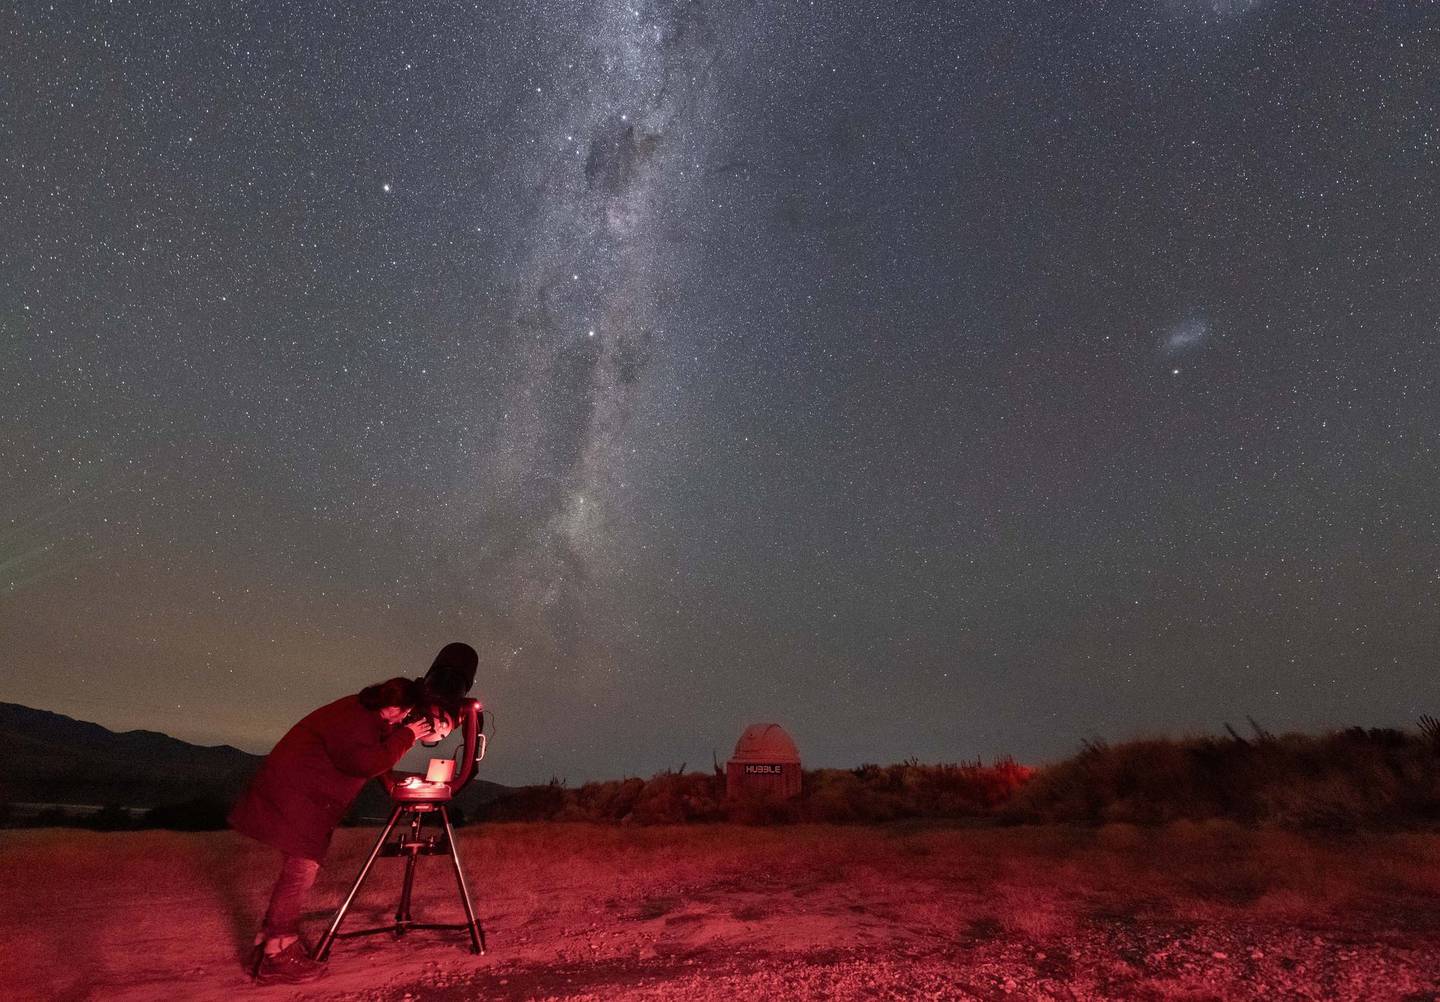 The crater experience at Aoraki Mackenzie's Dark Sky Project, a Ngāi Tahu Tourism operation, which connects manuhiri (visitors) to our night sky. Photo / Supplied